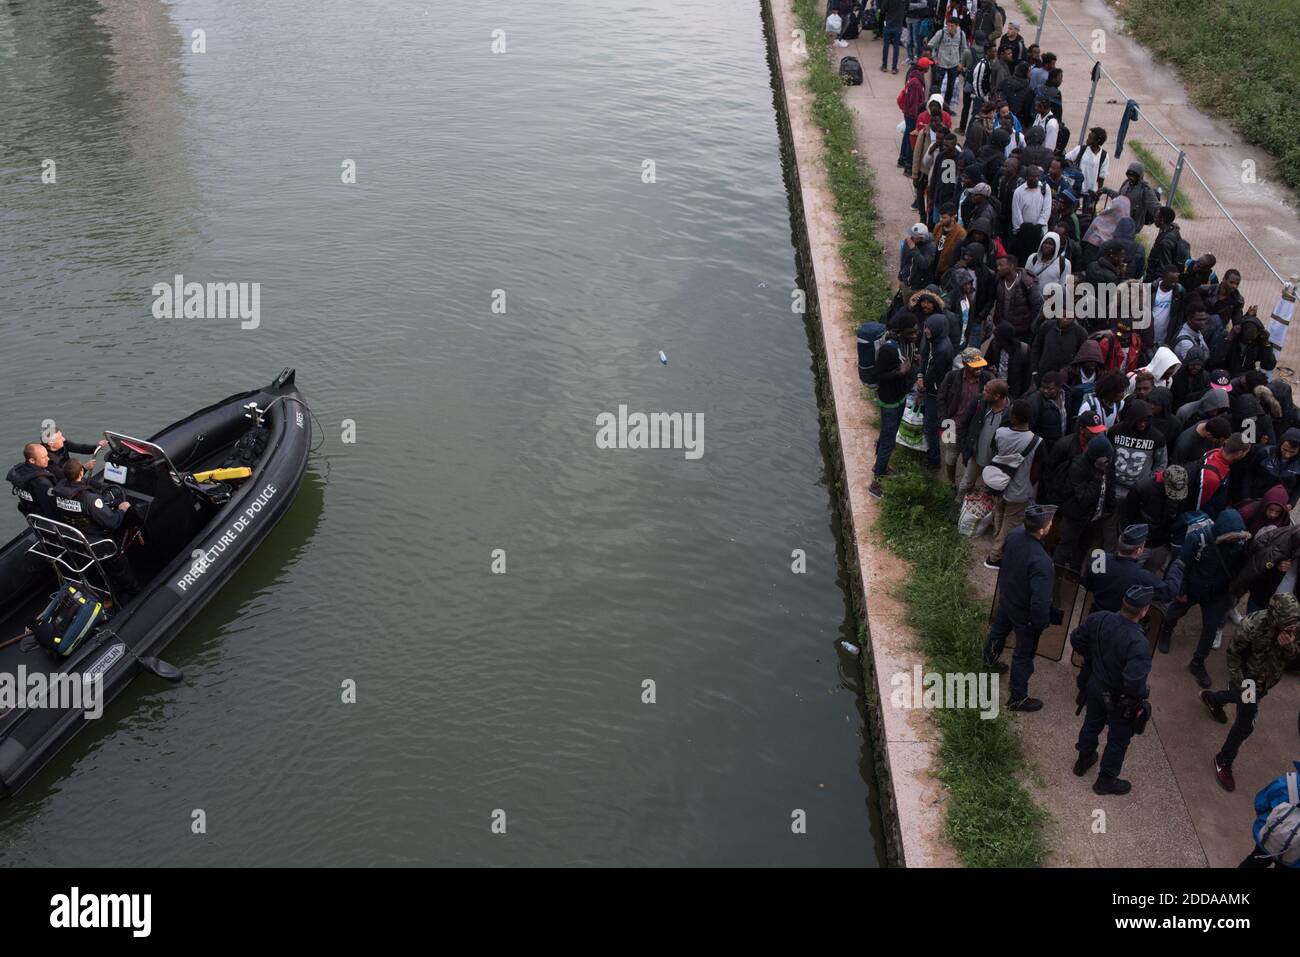 Migrants carry their belongings during the evacuation of the Millenaire makeshift camp along the Canal de Saint-Denis near Porte de la Villette, northern Paris, France, on May 30, 2018. More than a thousand migrants and refugees were evacuated on early May 30, 2018 from a makeshift camp that had been set up for several weeks along the Canal. Photo by Samuel Boivin/ABACAPRESS.COM Stock Photo